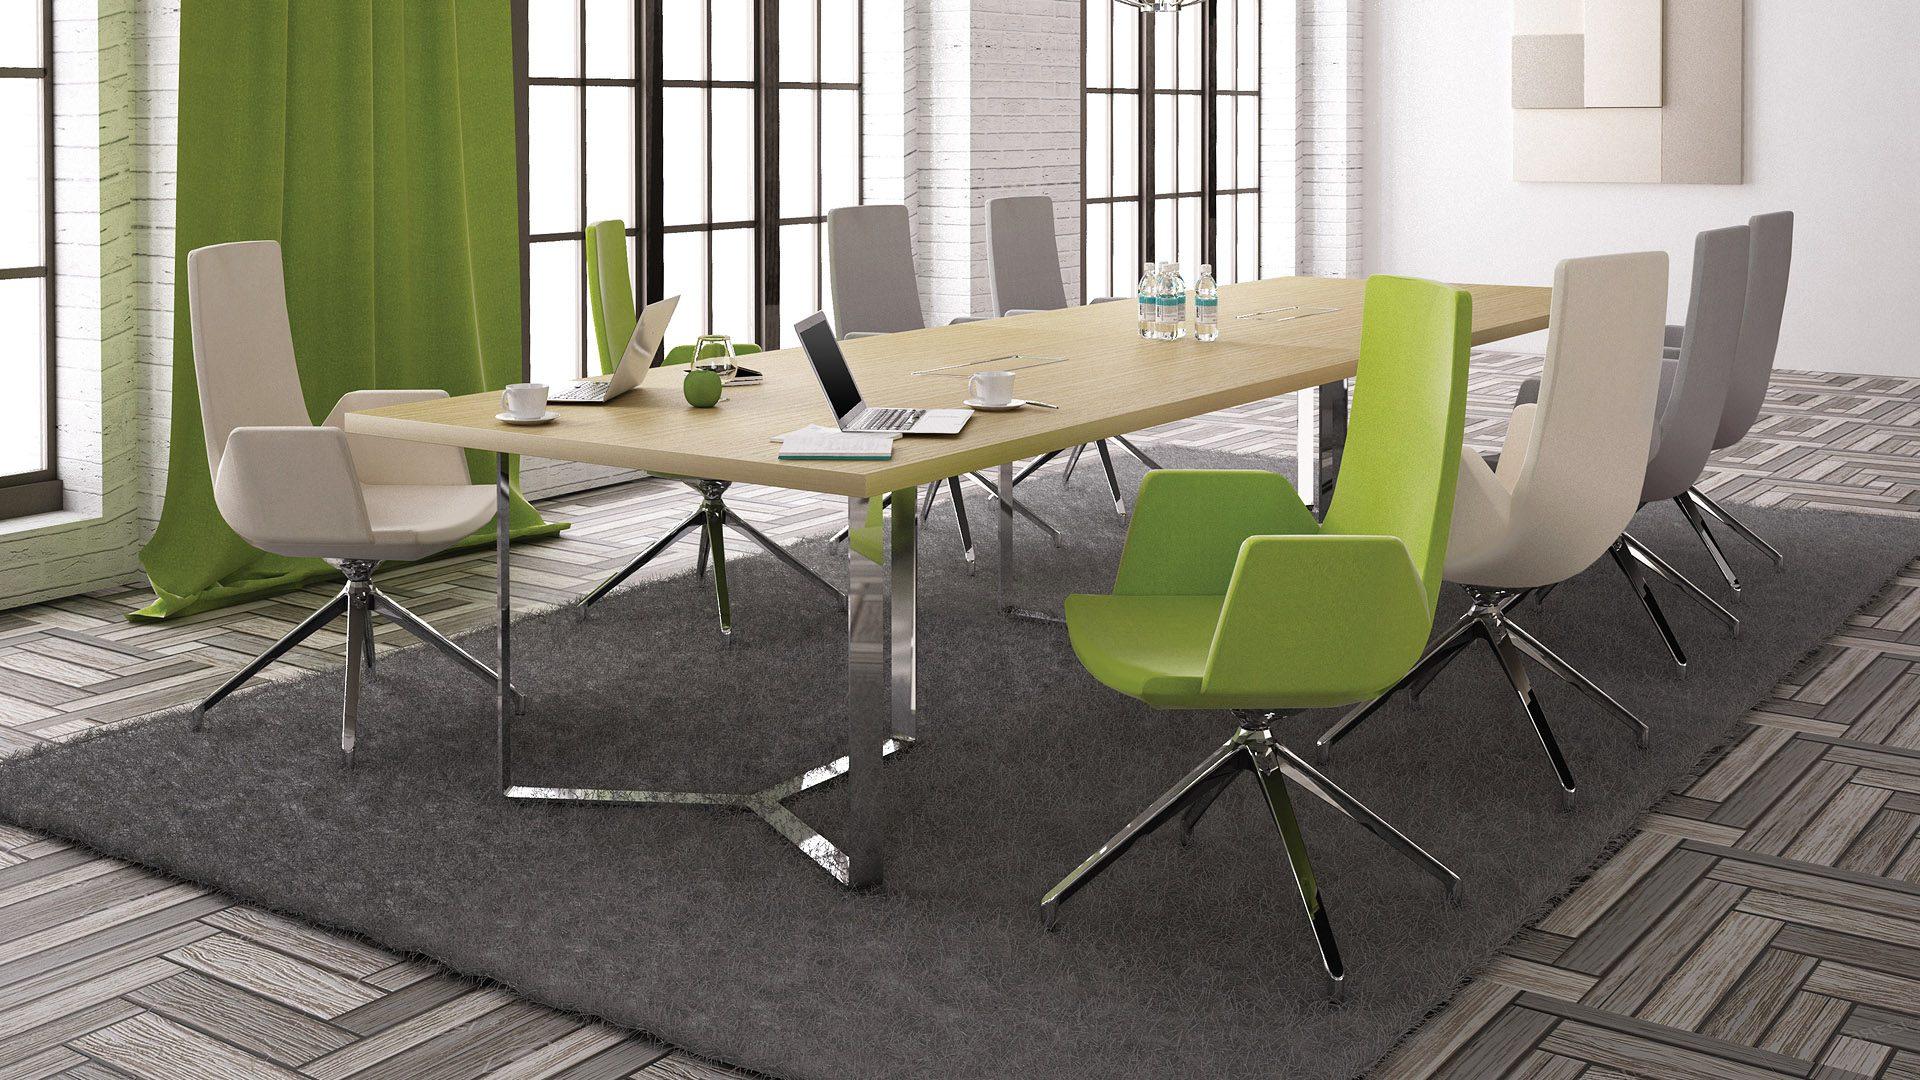 Chrome Plana executive meeting table with North Cape meeting chairs